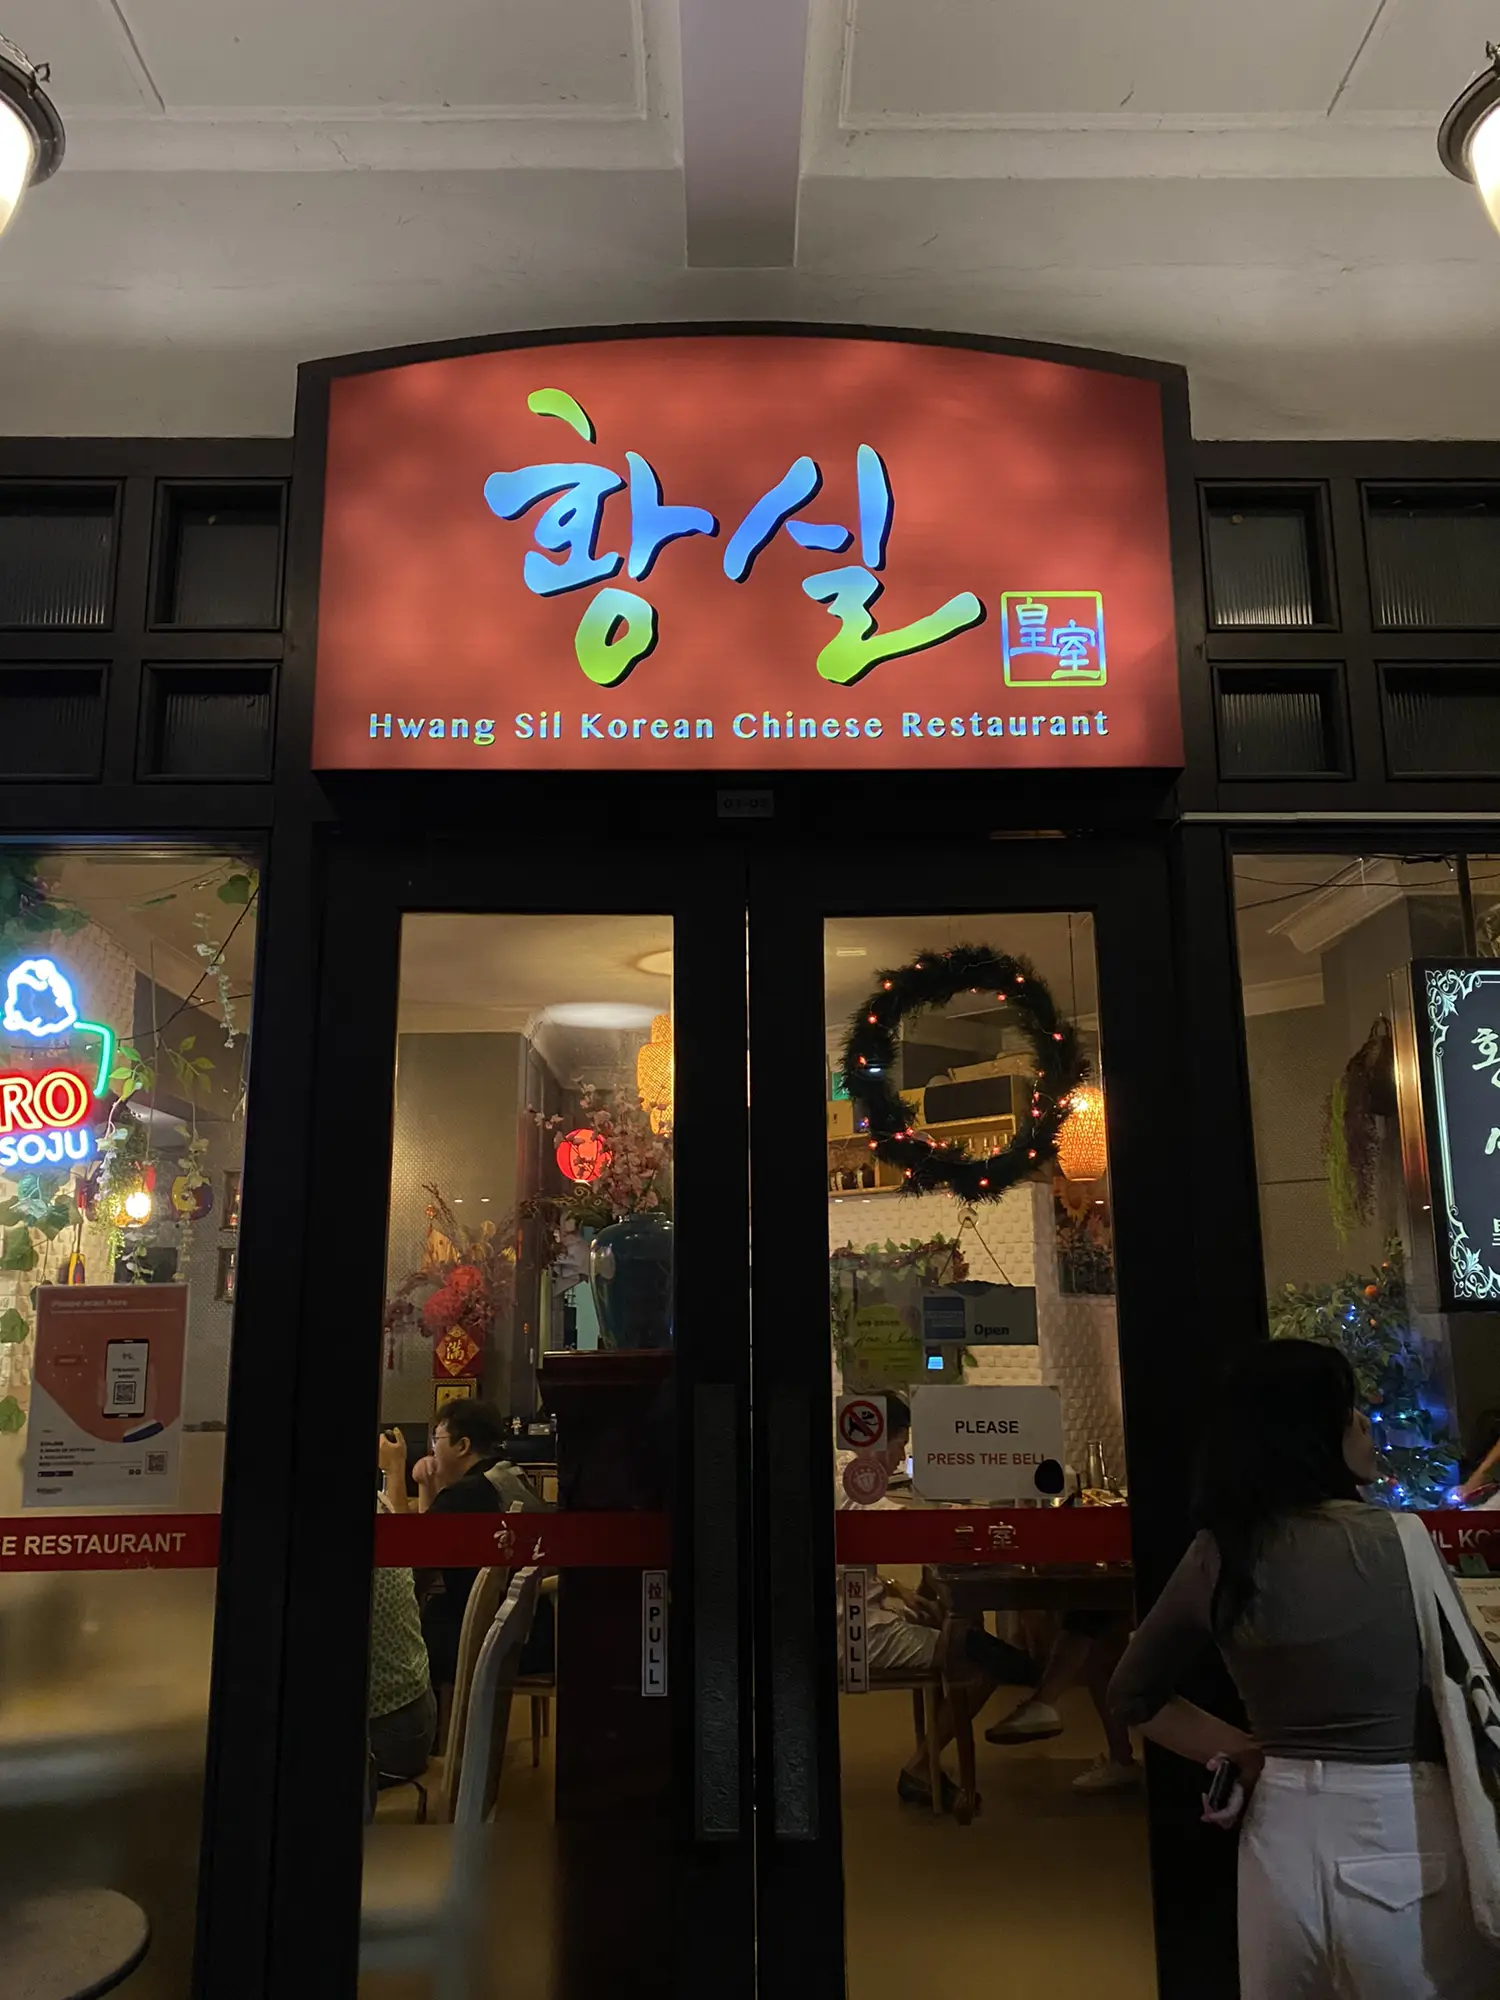 IMO hands down the most legit korean food in sg's images(5)